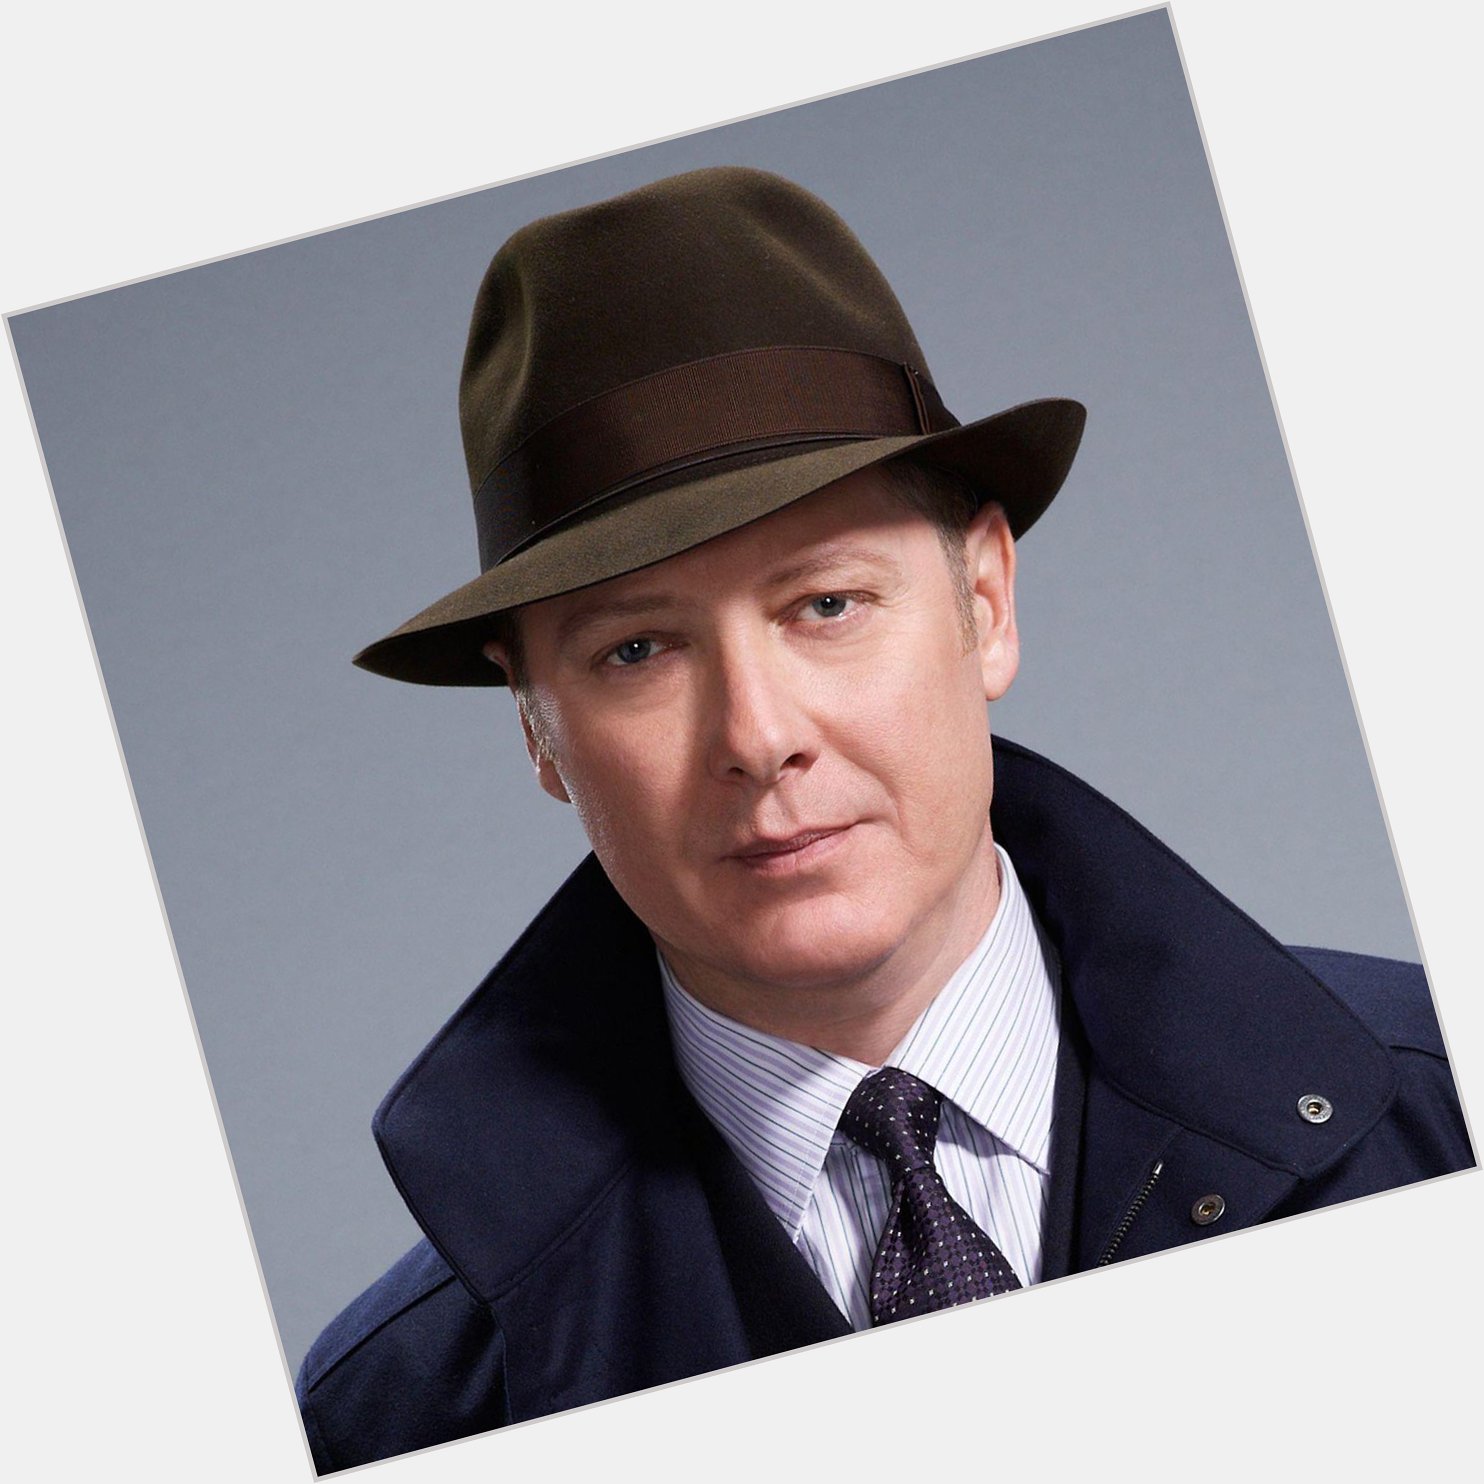 Happy Birthday to James Spader, who turns 55 today! 